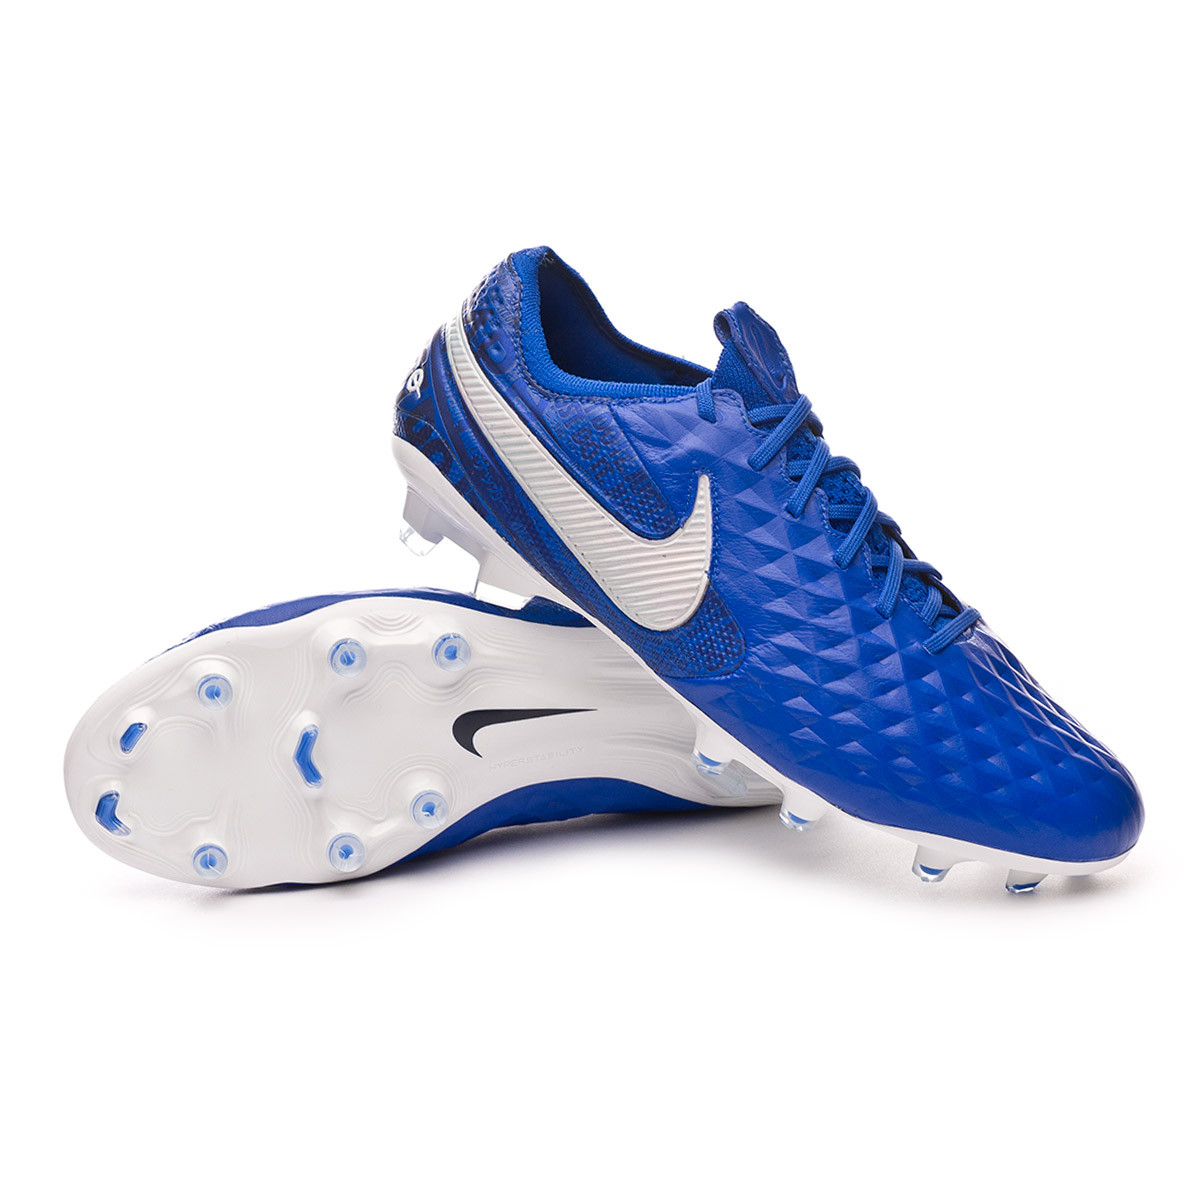 Nike Tiempo Legend 8 Official Images and Release Info Nike.